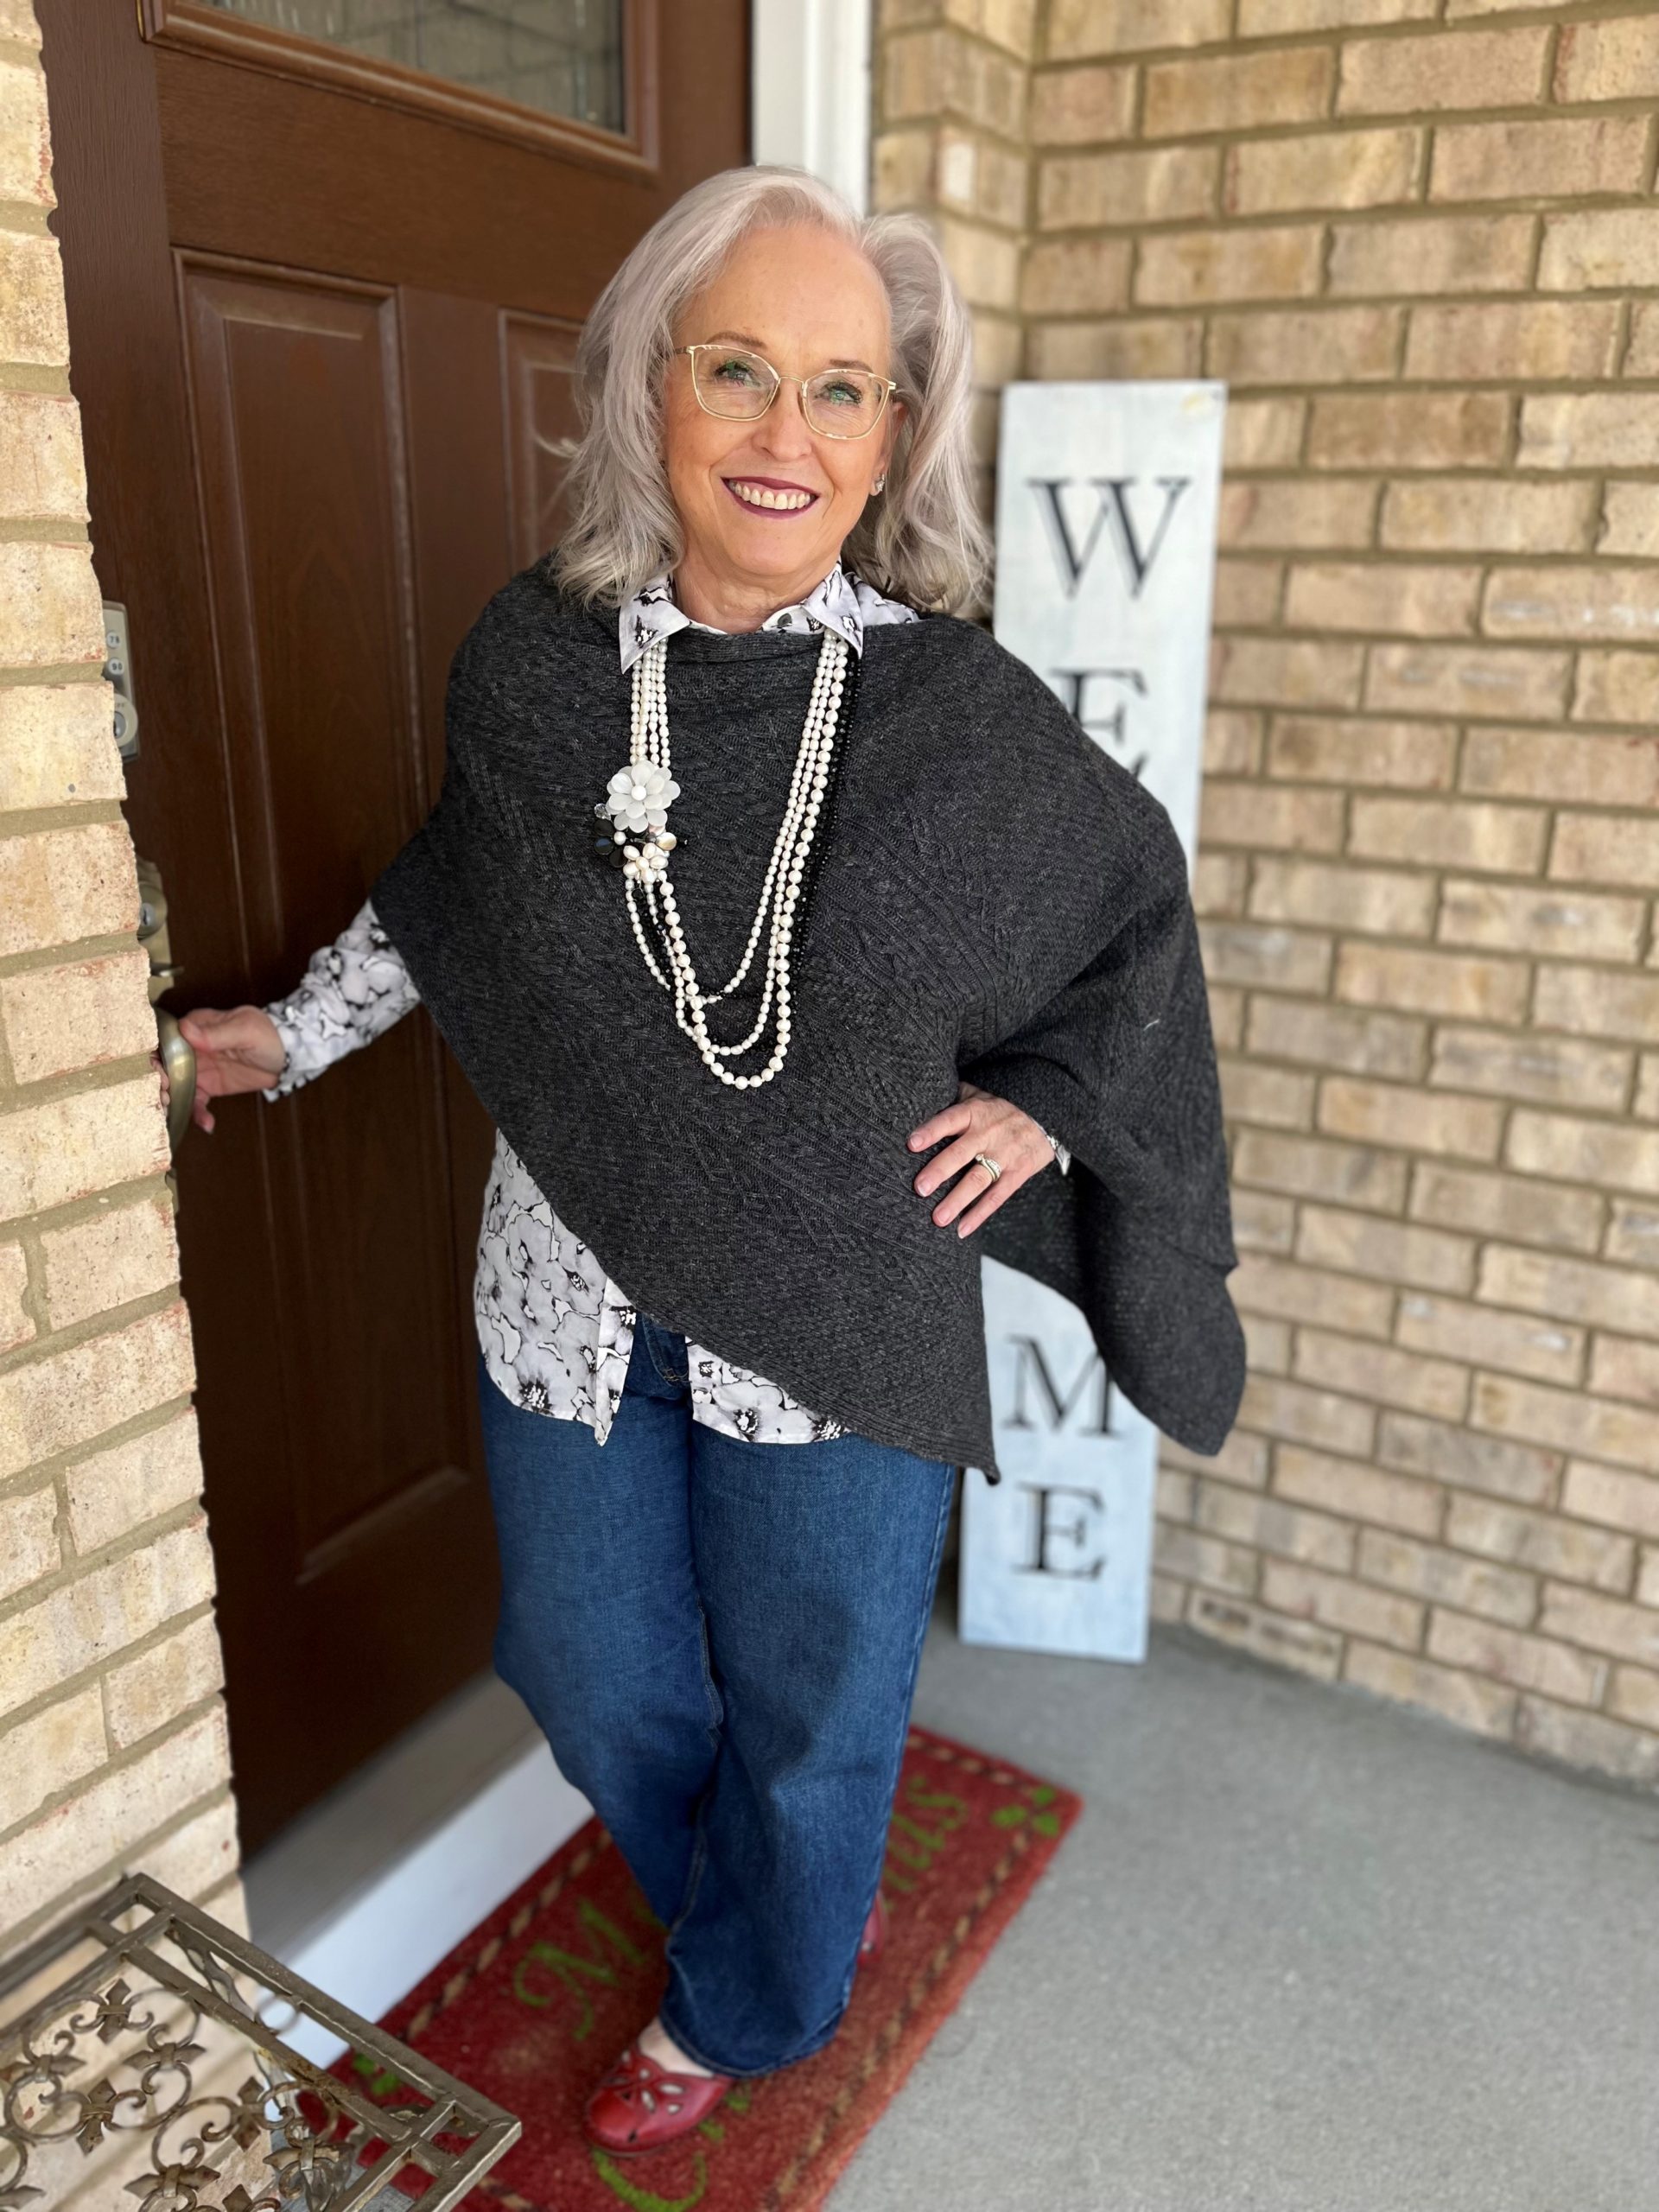 Trend setting with Ageless Style? - Marsha in the Middle